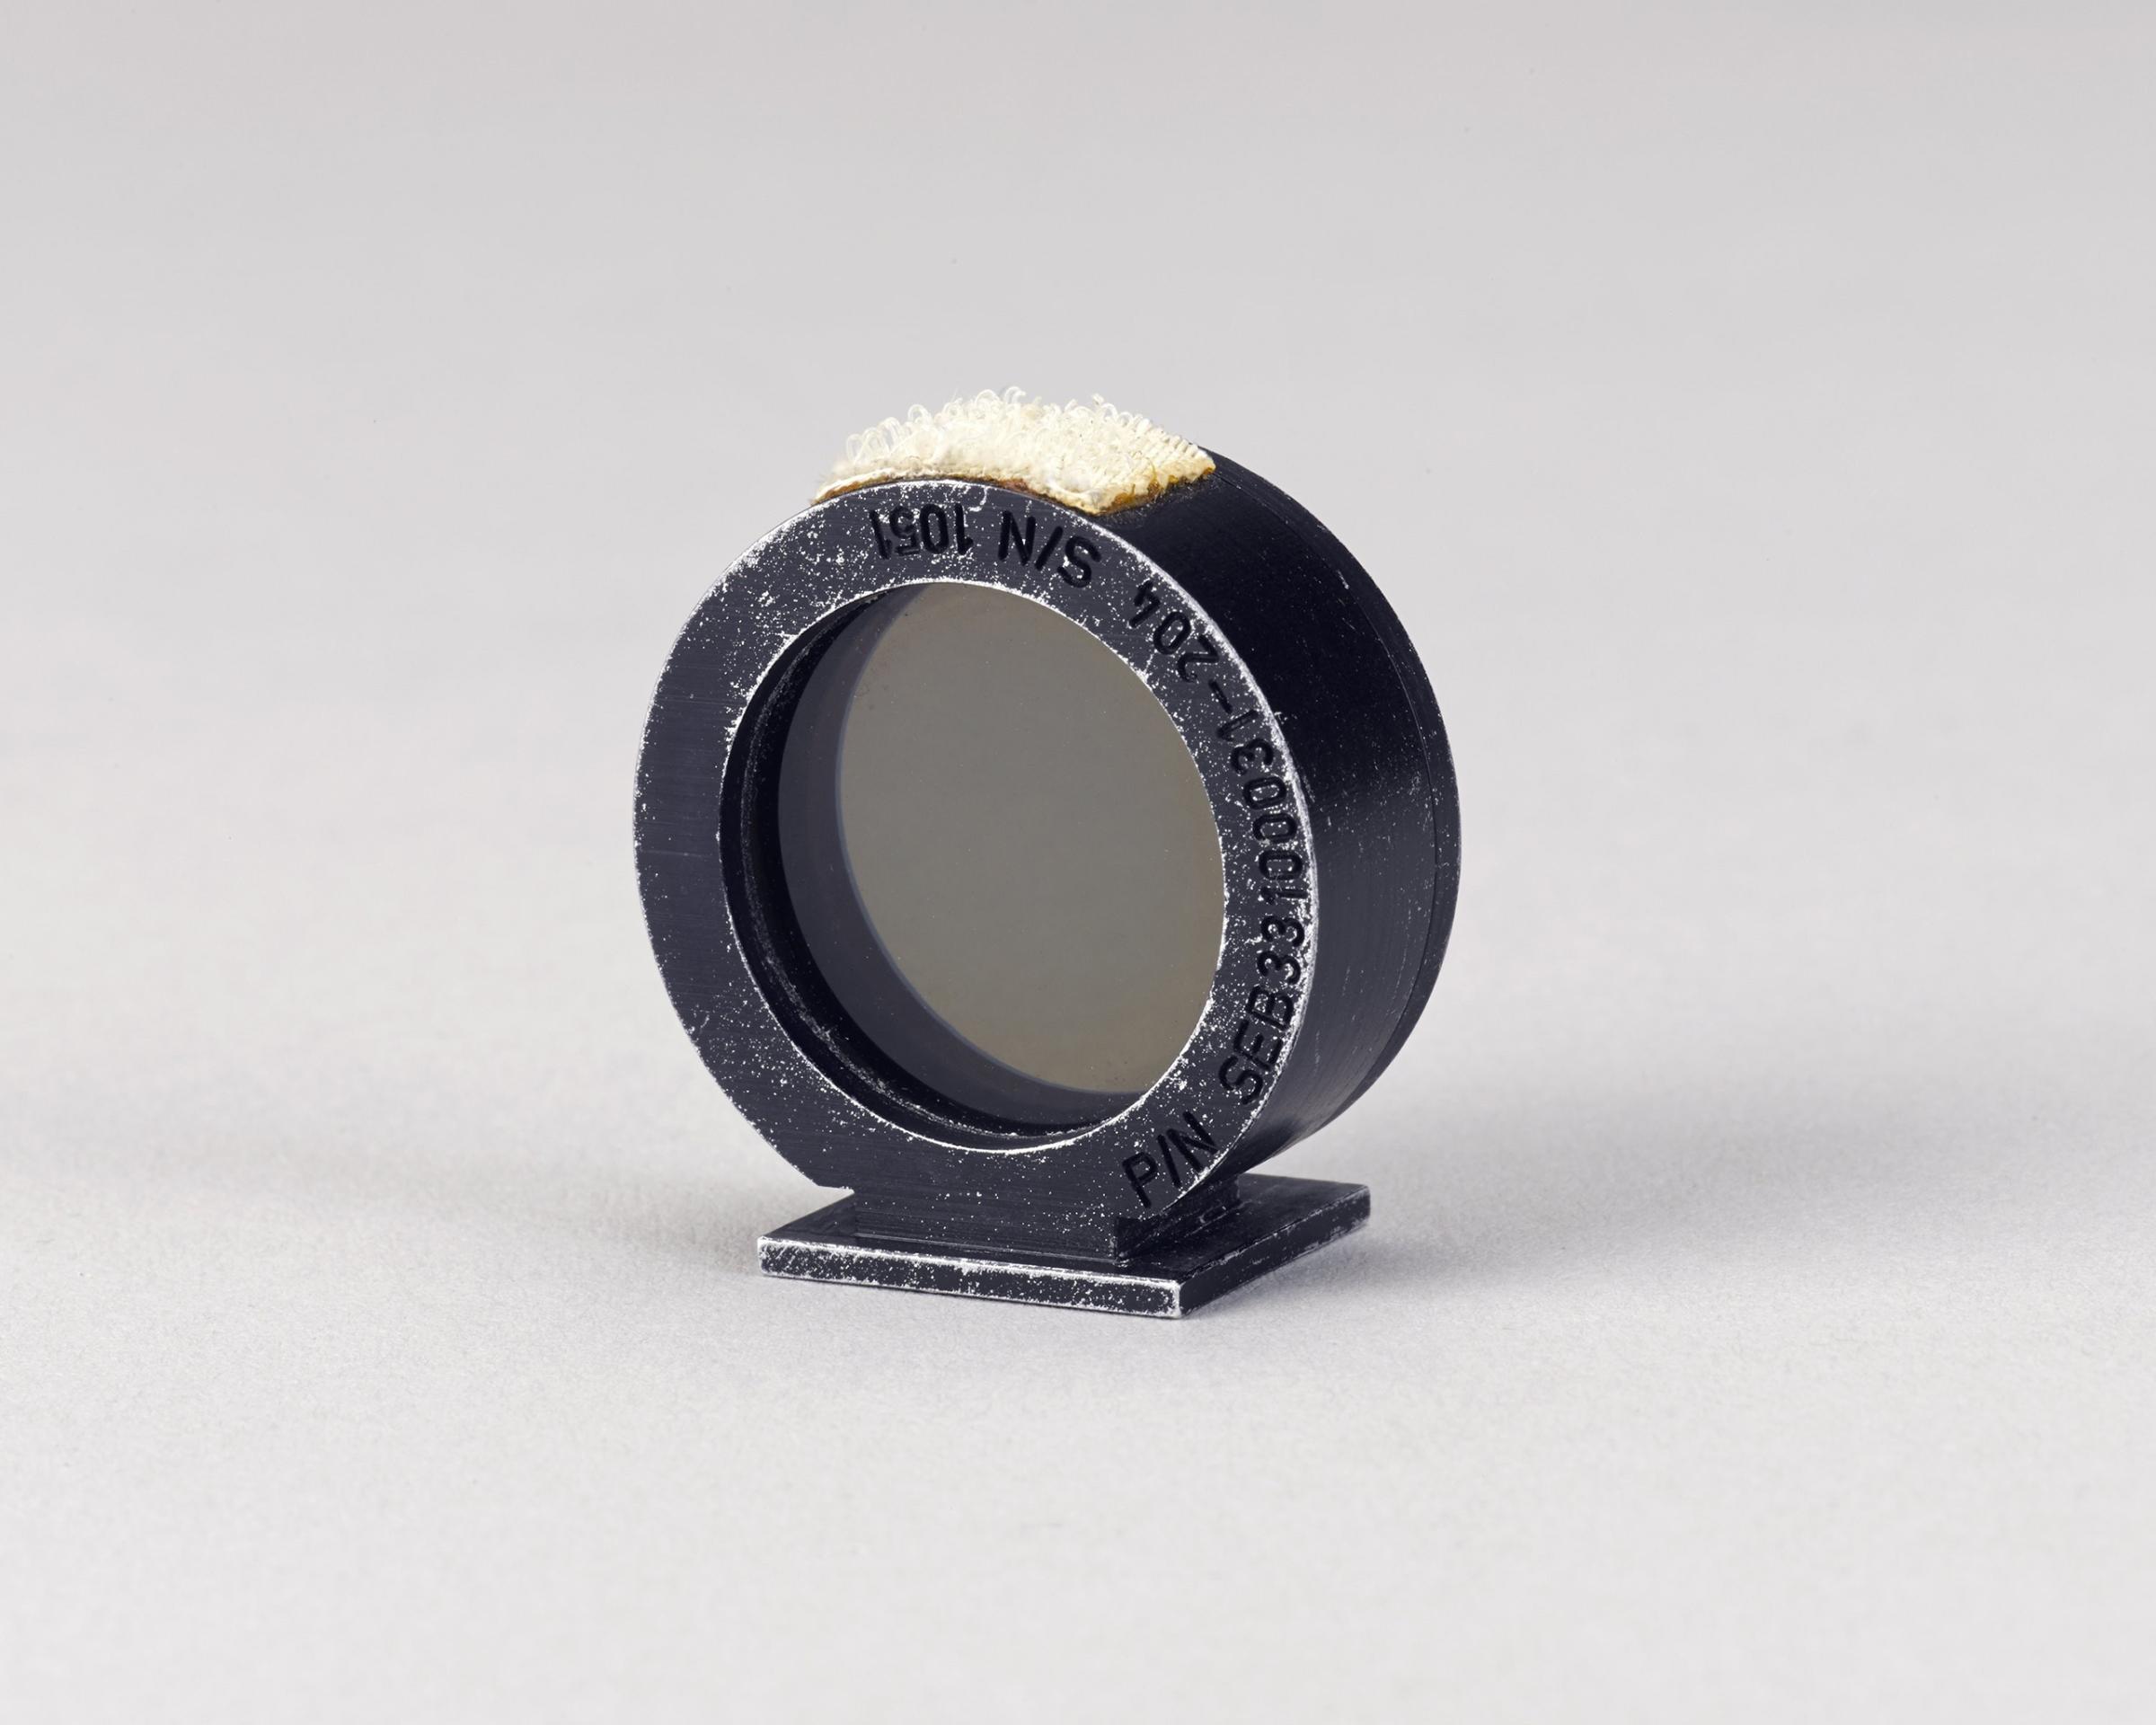 Motion picture ring sight used on the Moon during Apollo 15. This camera accessory was used by astronaut James B, Irwin on the 16mm camera inside the lunar module in 1971. It was on the lunar surface for 66 hours.